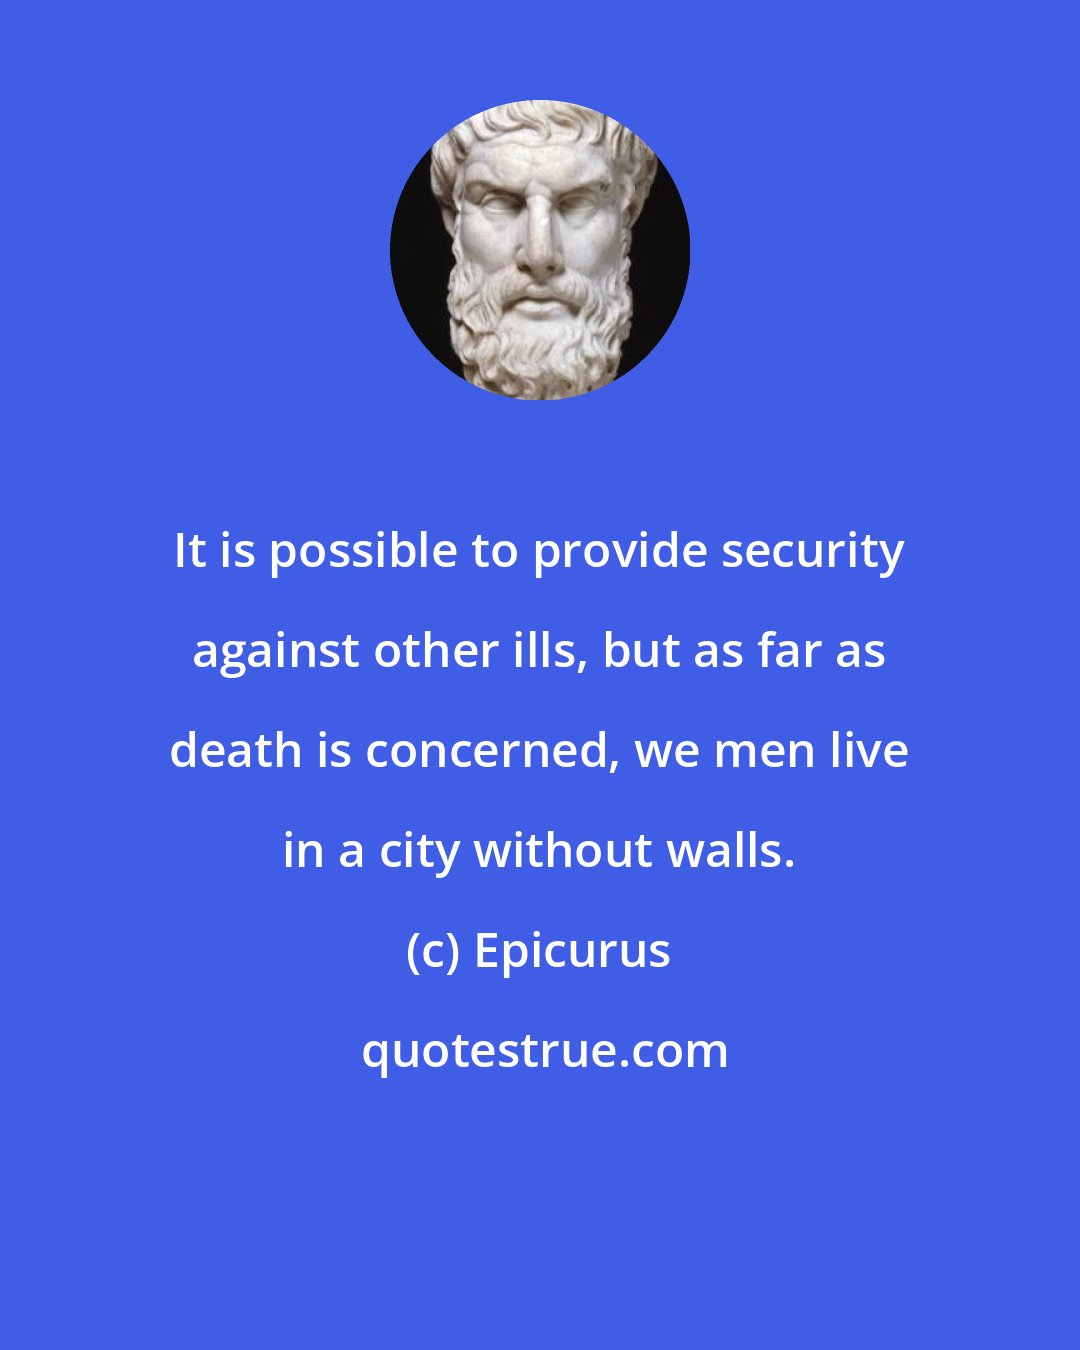 Epicurus: It is possible to provide security against other ills, but as far as death is concerned, we men live in a city without walls.